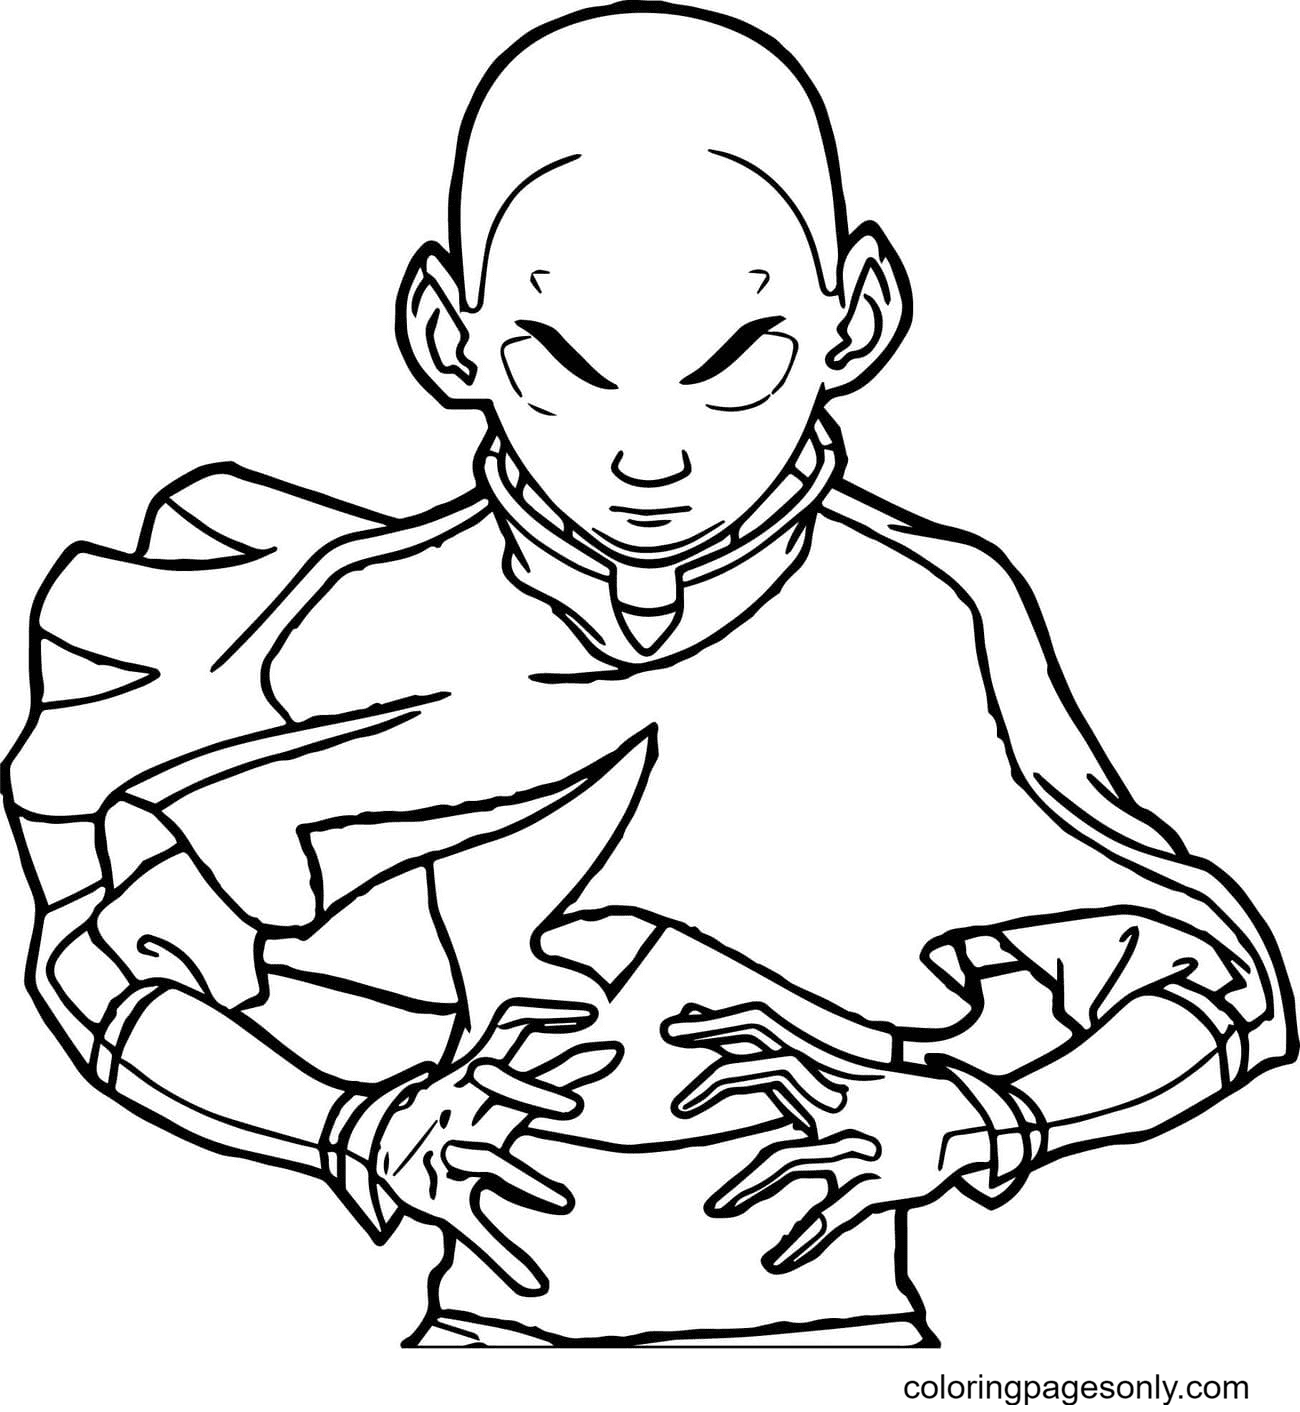 Avatar The Last Airbender Coloring Pages Aang 5797